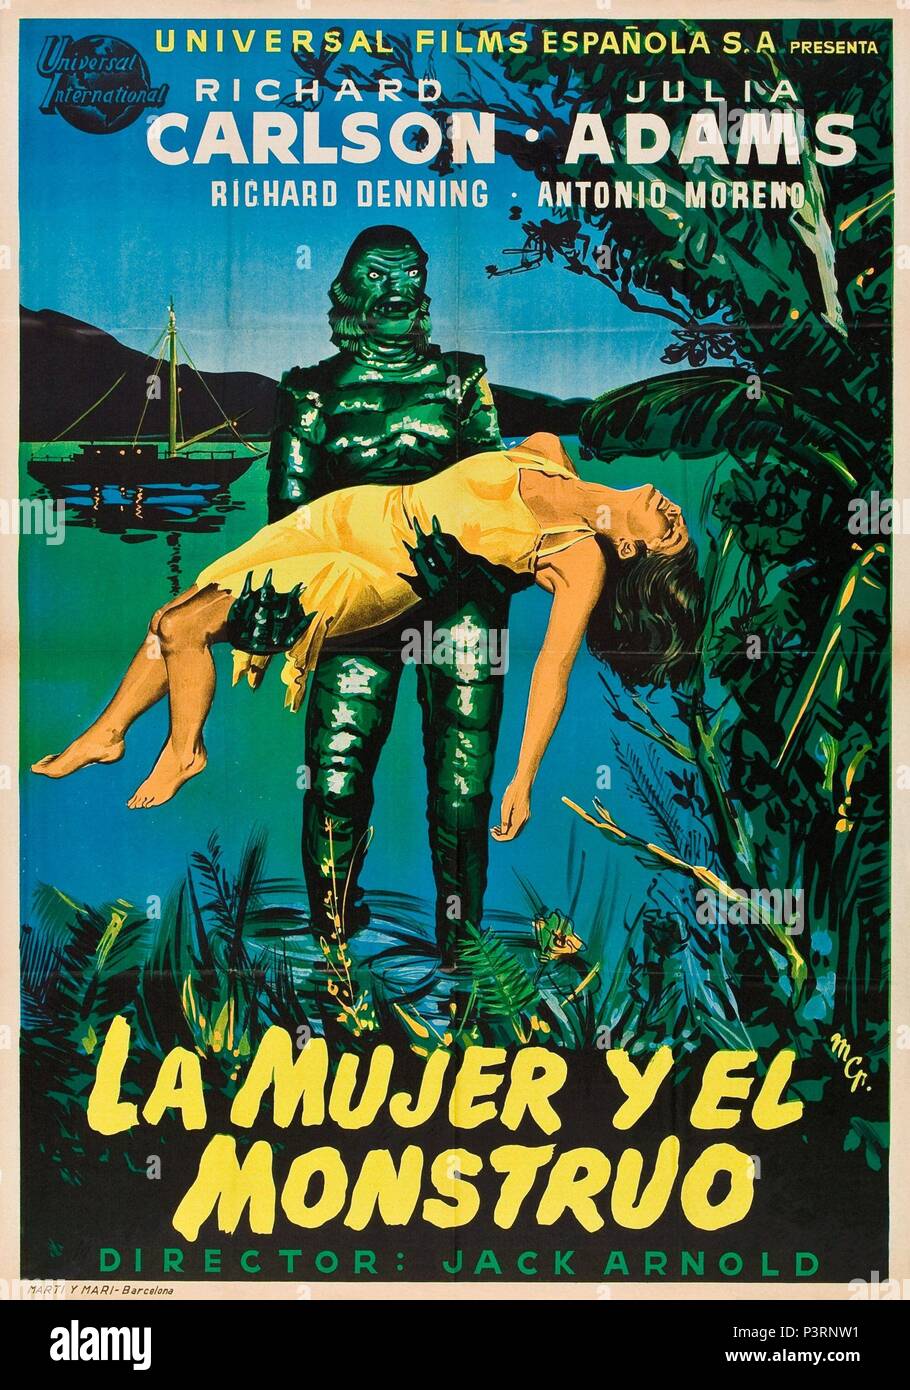 Original Film Title: CREATURE FROM THE BLACK LAGOON.  English Title: CREATURE FROM THE BLACK LAGOON.  Film Director: JACK ARNOLD.  Year: 1954. Credit: UNIVERSAL PICTURES / Album Stock Photo